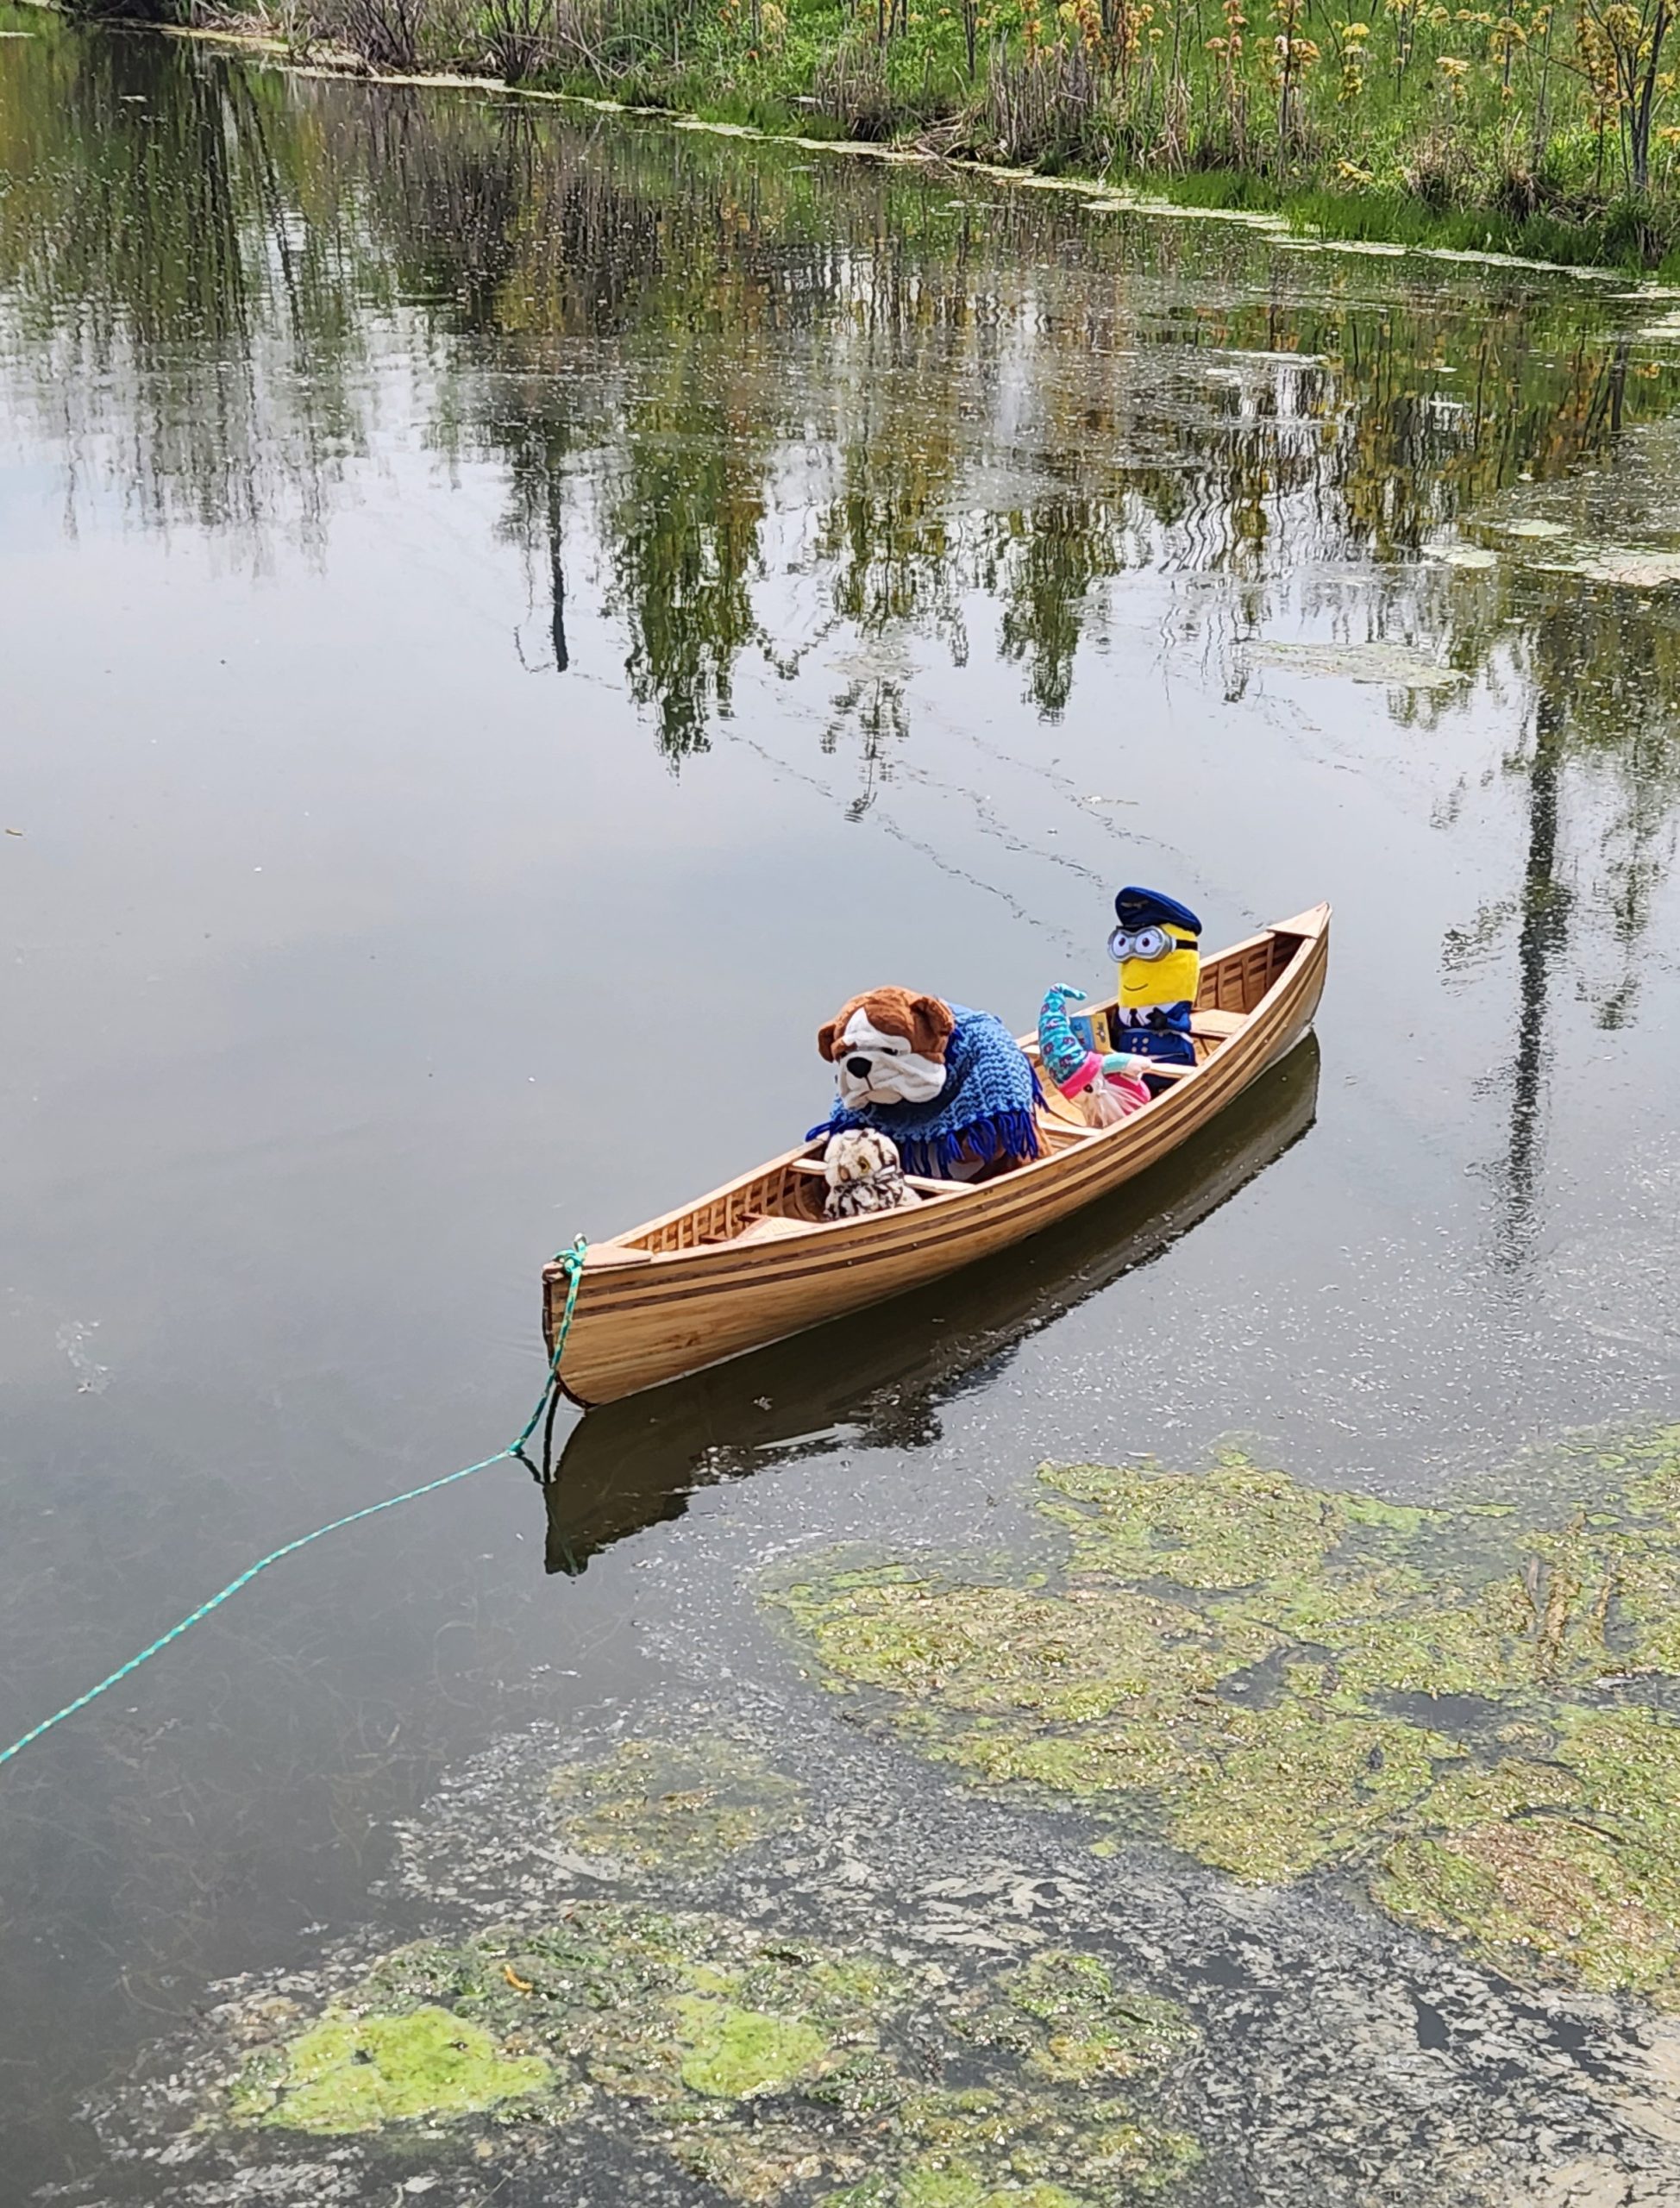 This photo features a canoe with four plushies floating over the water.